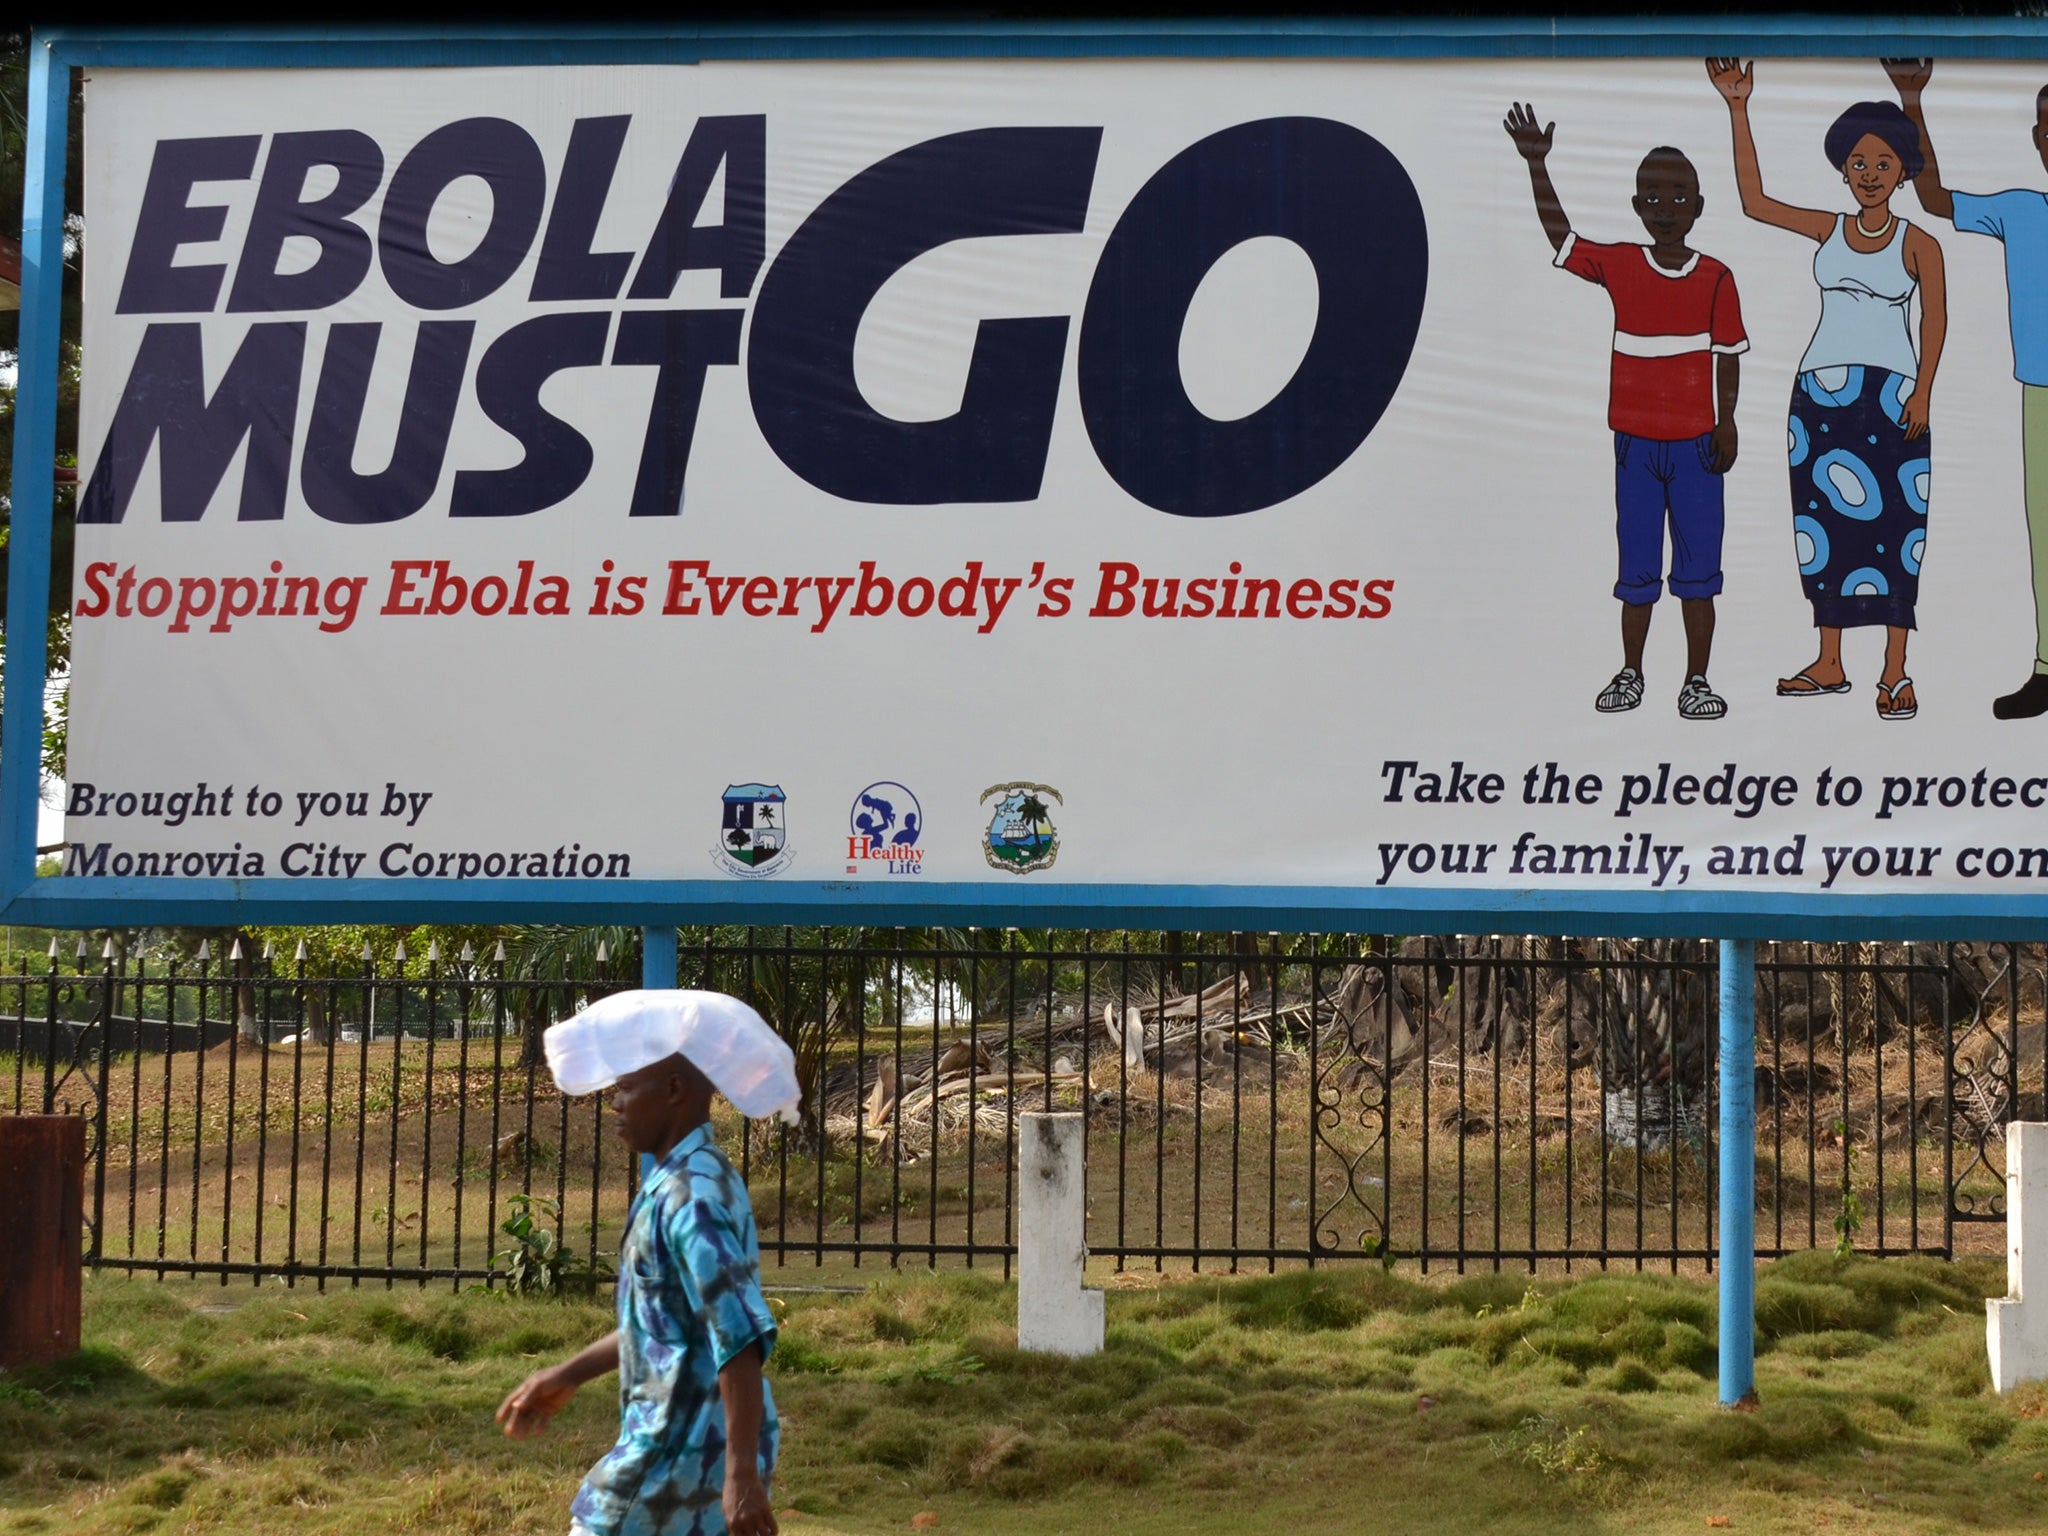 Health workers are convinced Ebola has killed more than 10,000